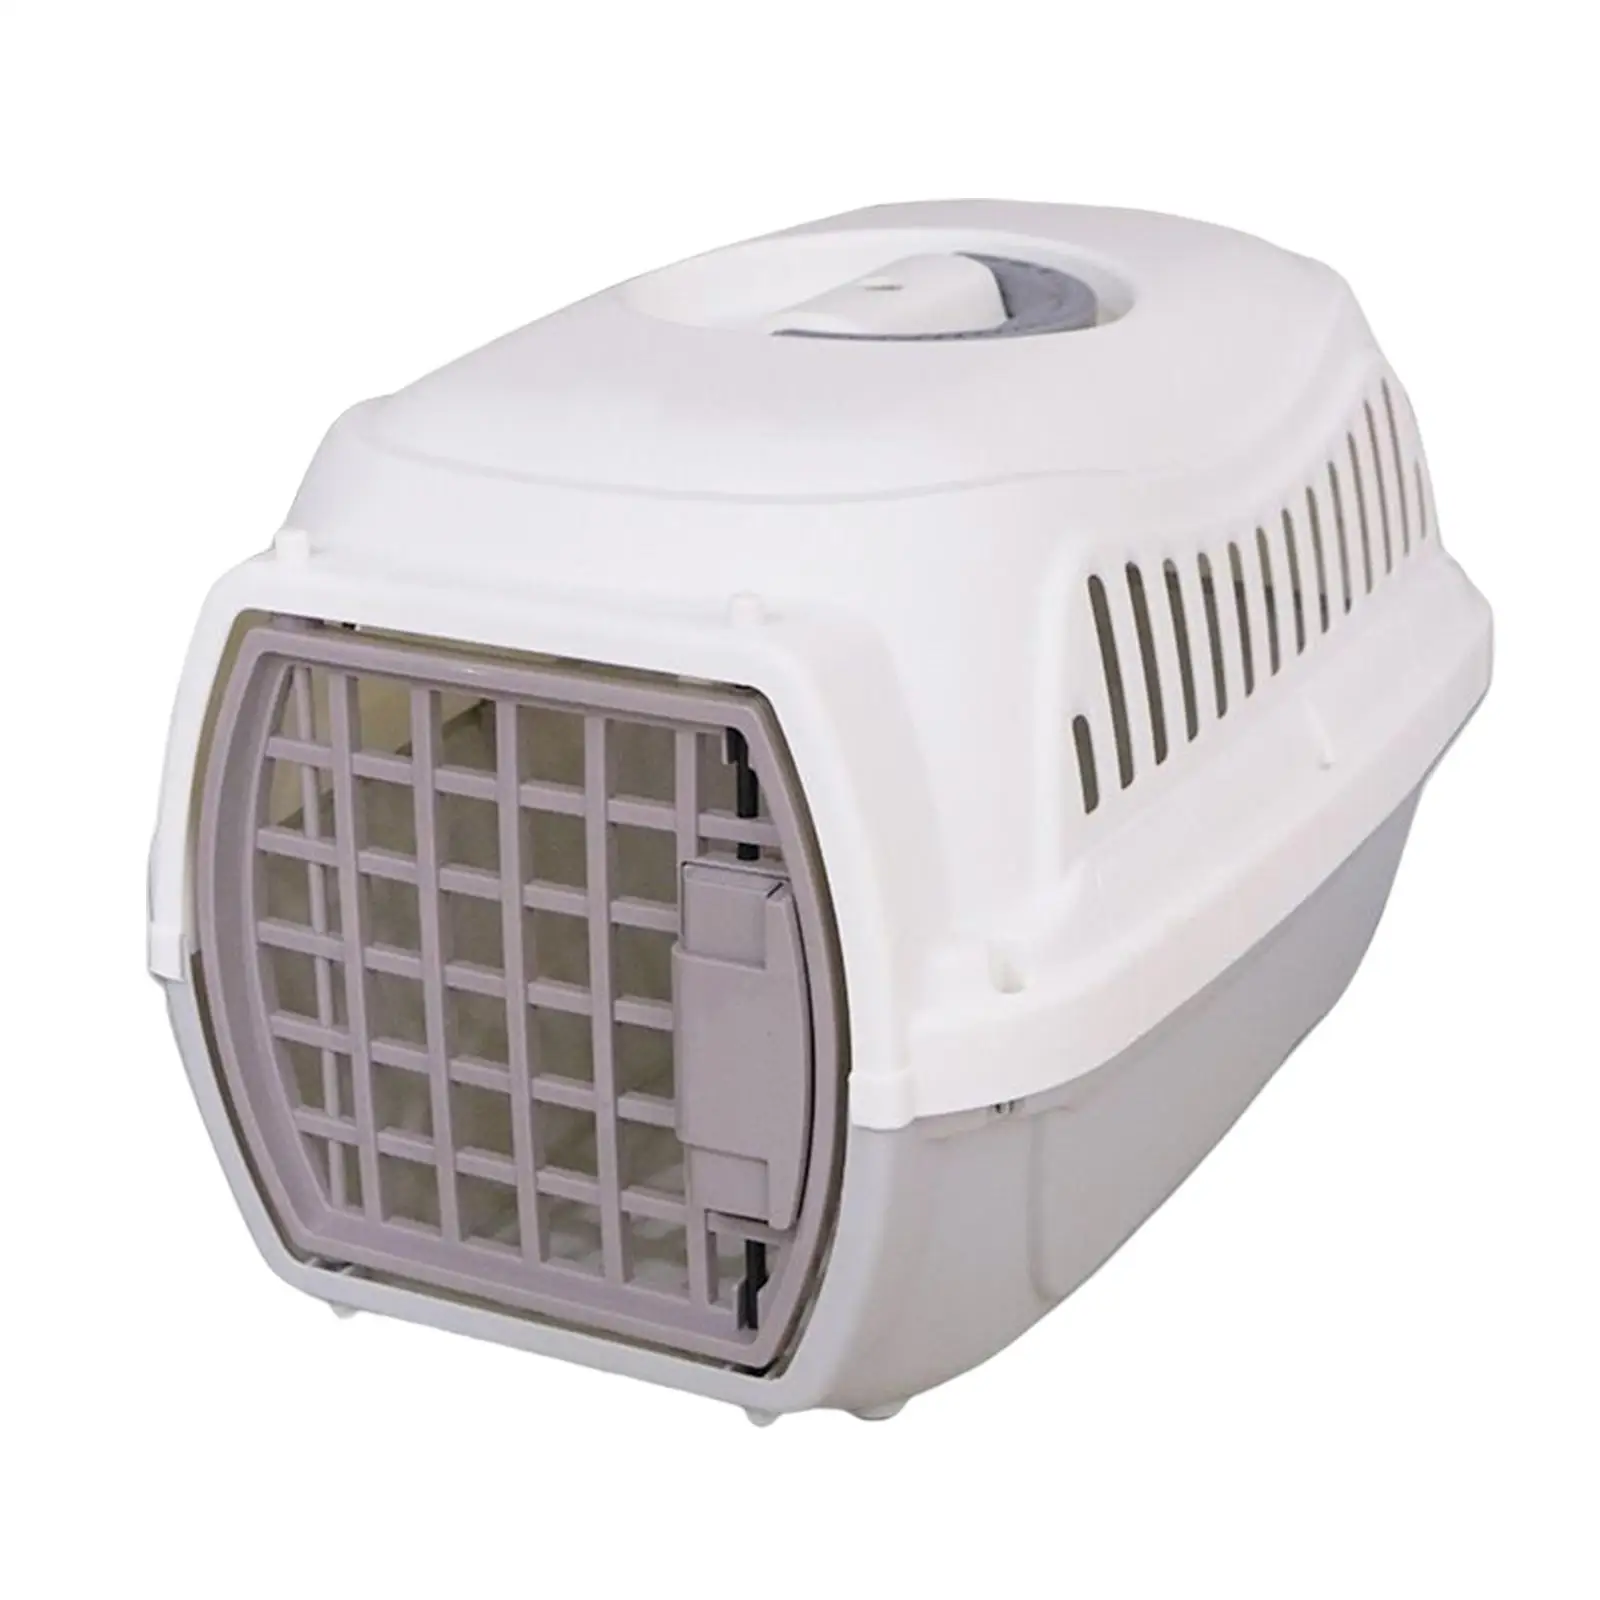 Cat Carrier Box with Handle Pet Carrier Air Carriers Transport Cage Large